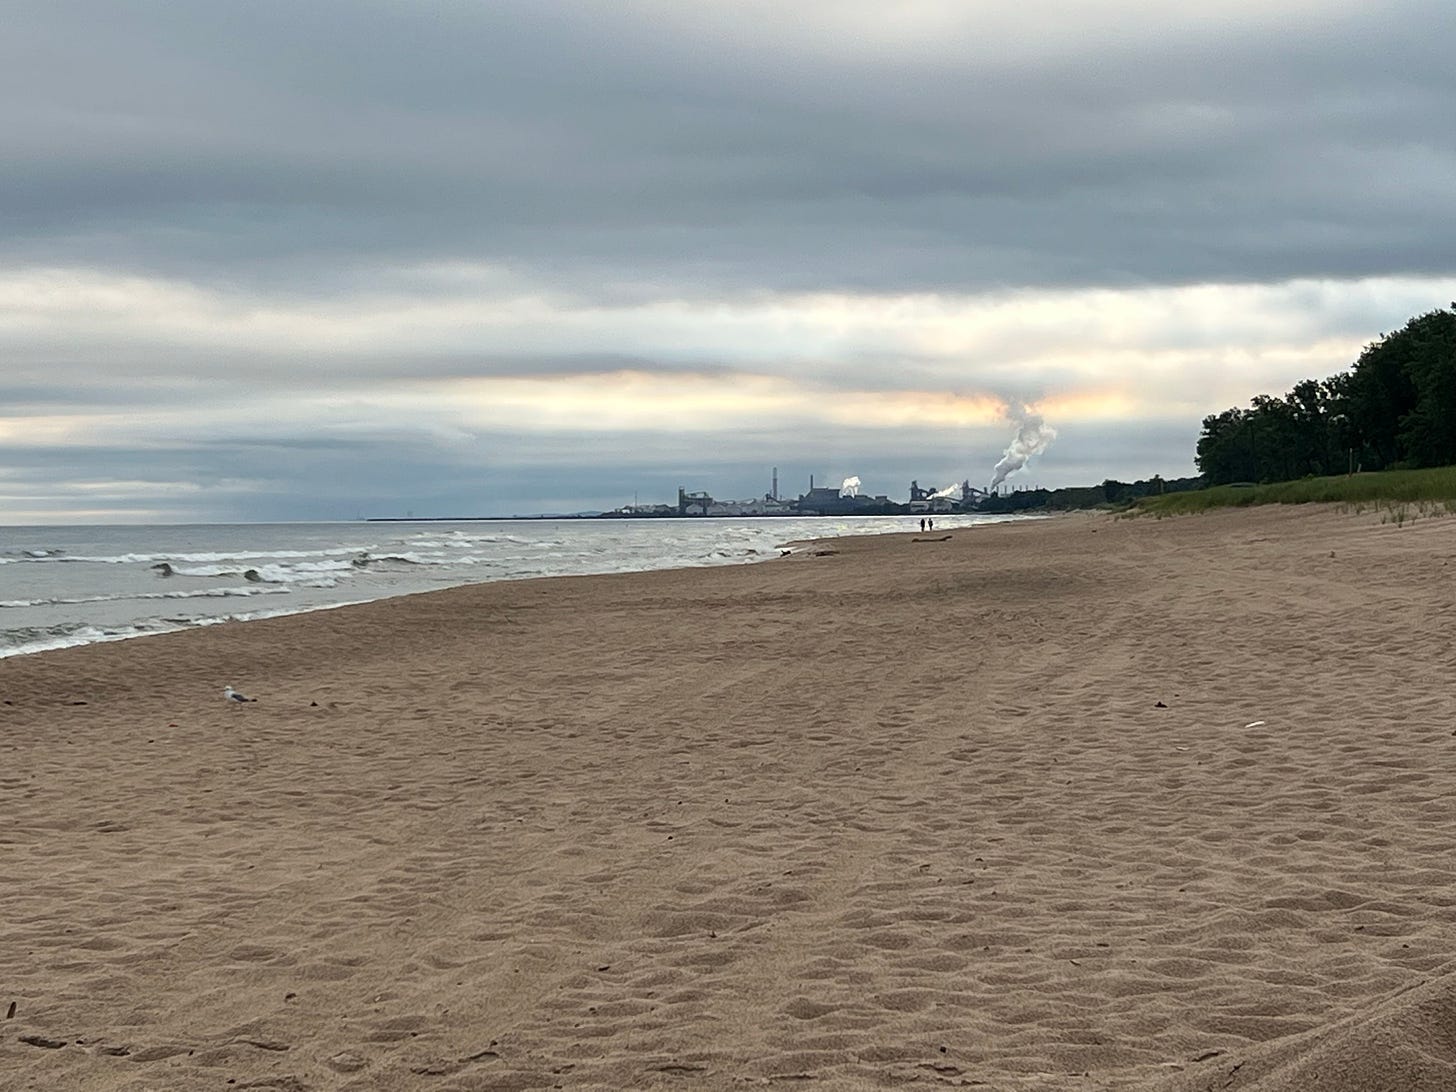 A beach on a cloudy morning with factories and smokestacks in the distance